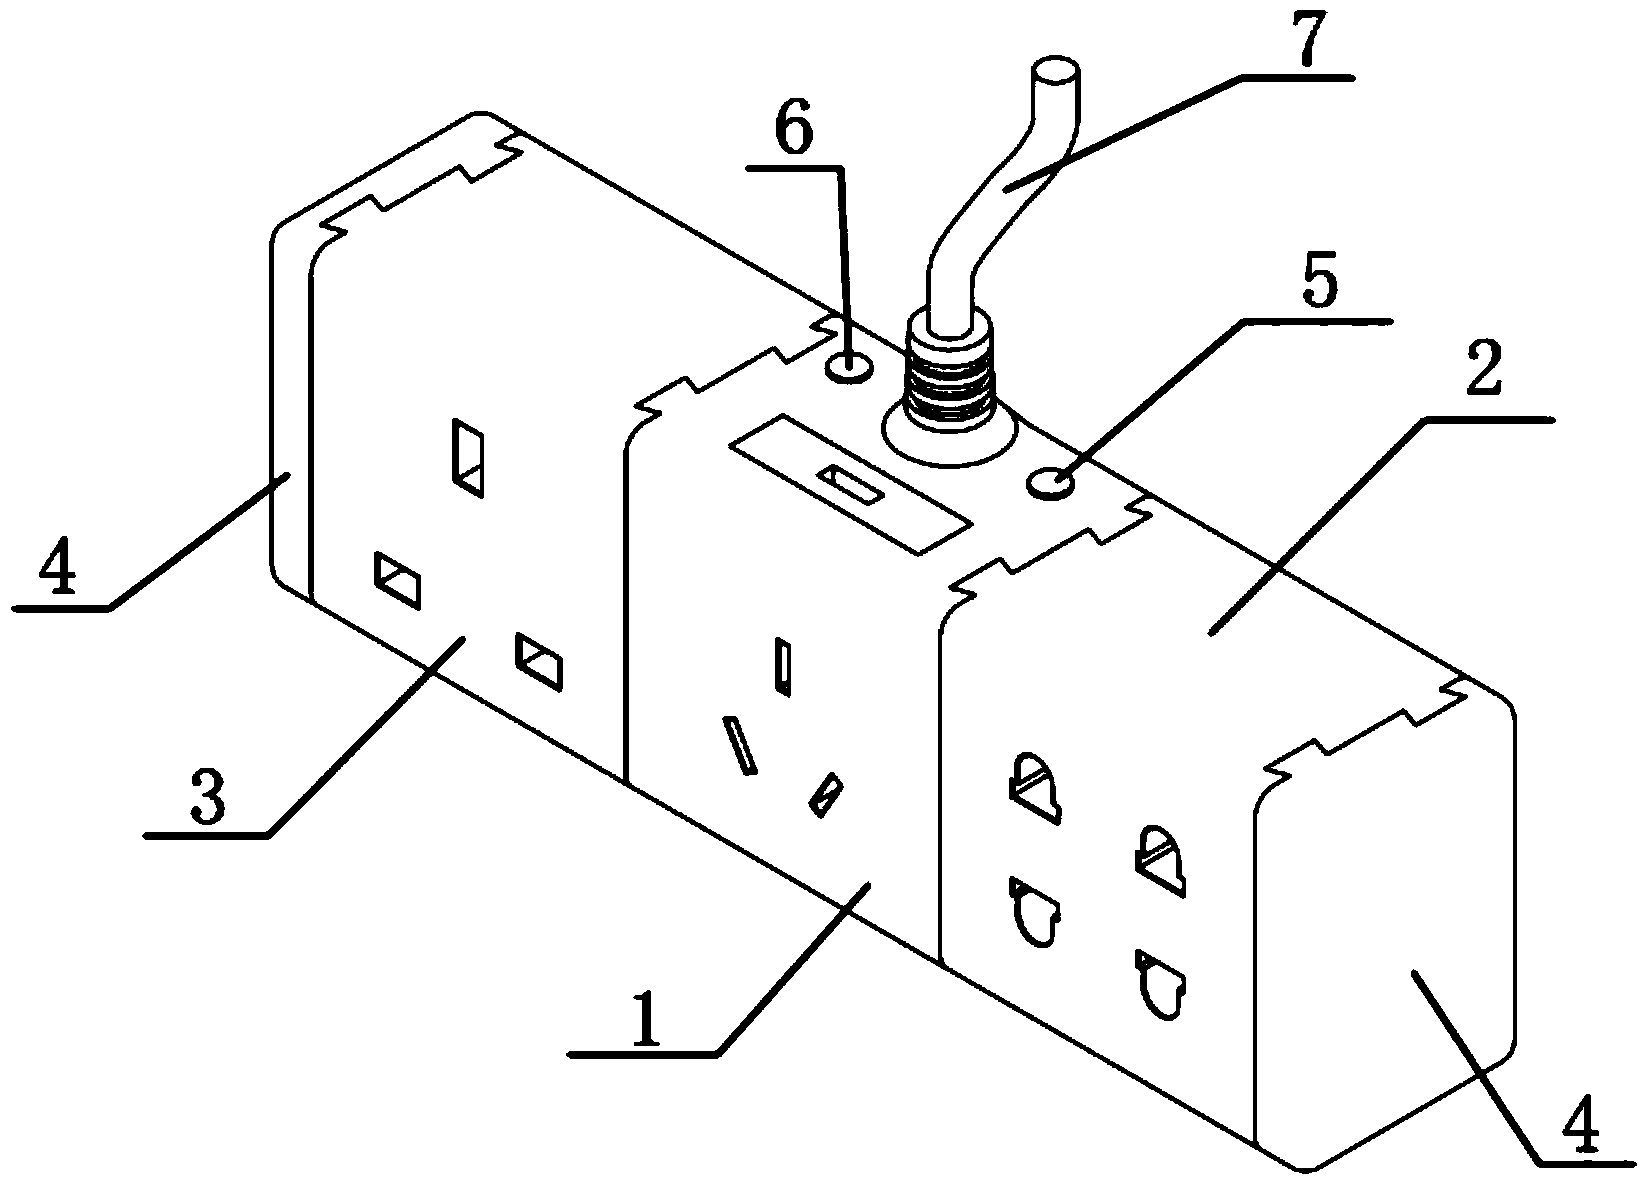 Extended combined module power socket and application